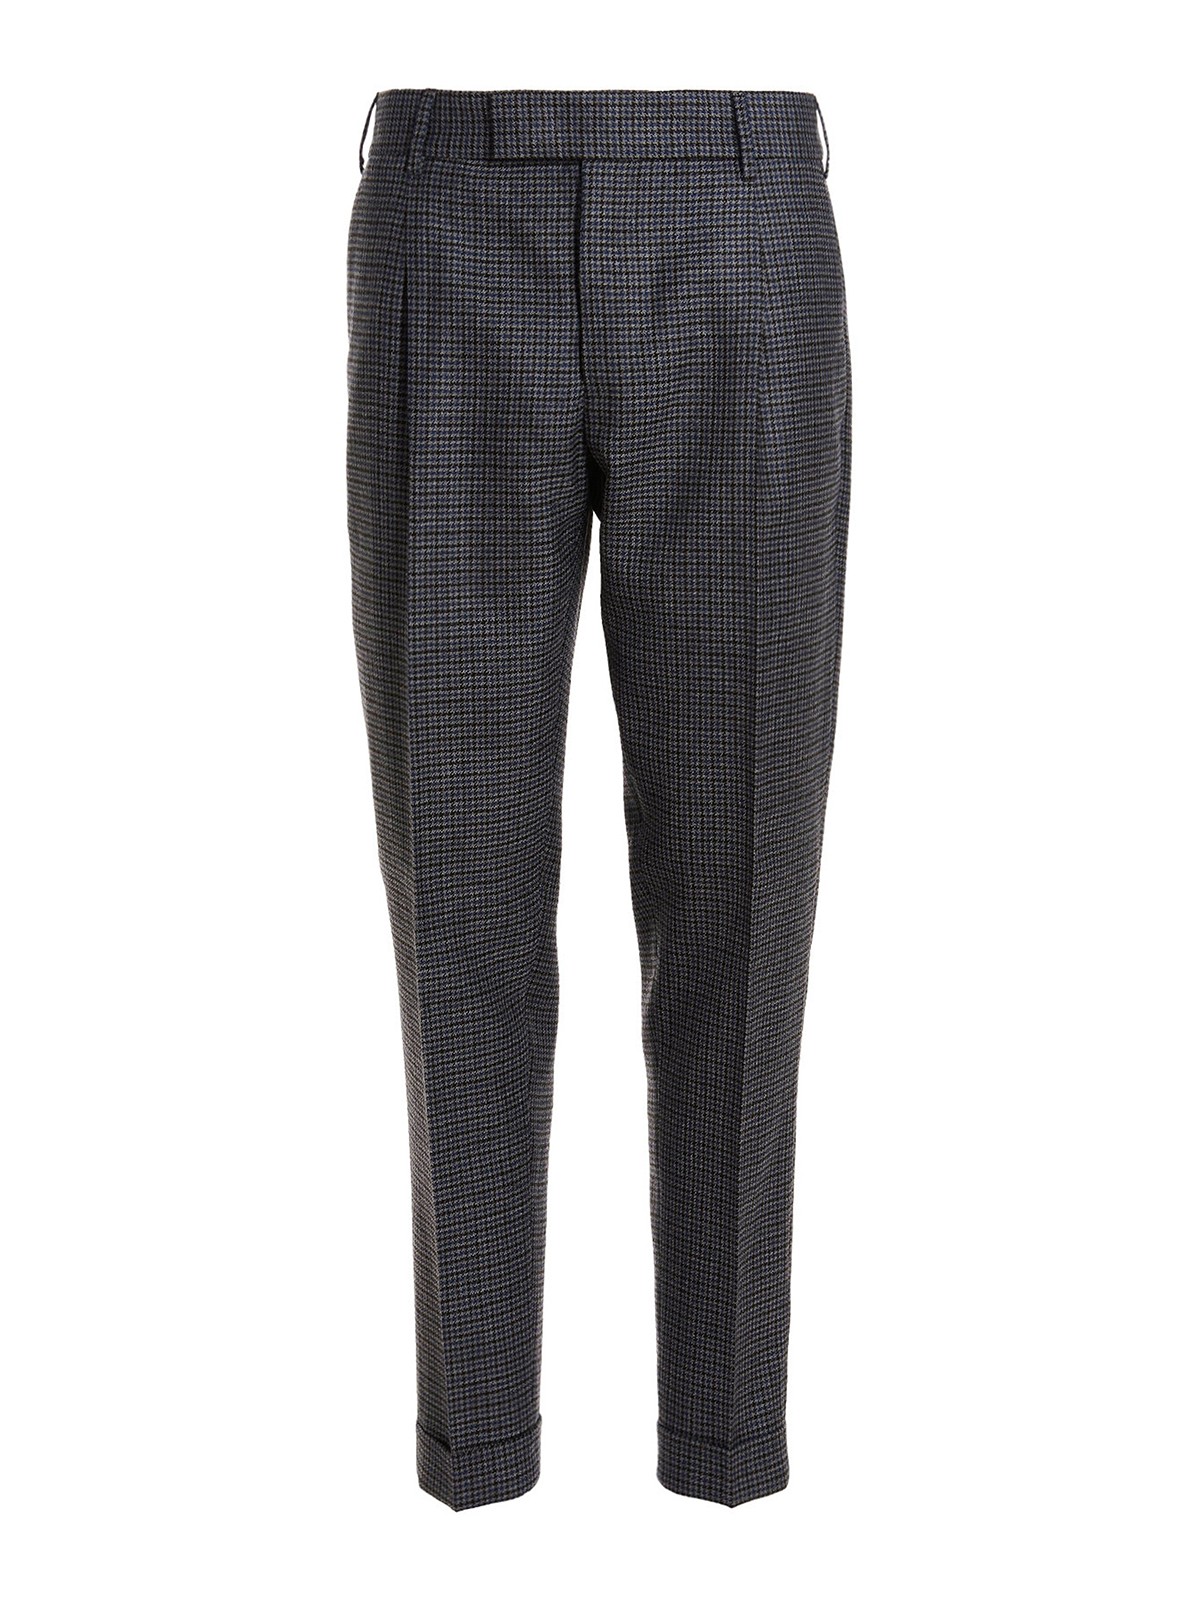 Tailored & Formal trousers Pt Torino - Rebel trousers ...